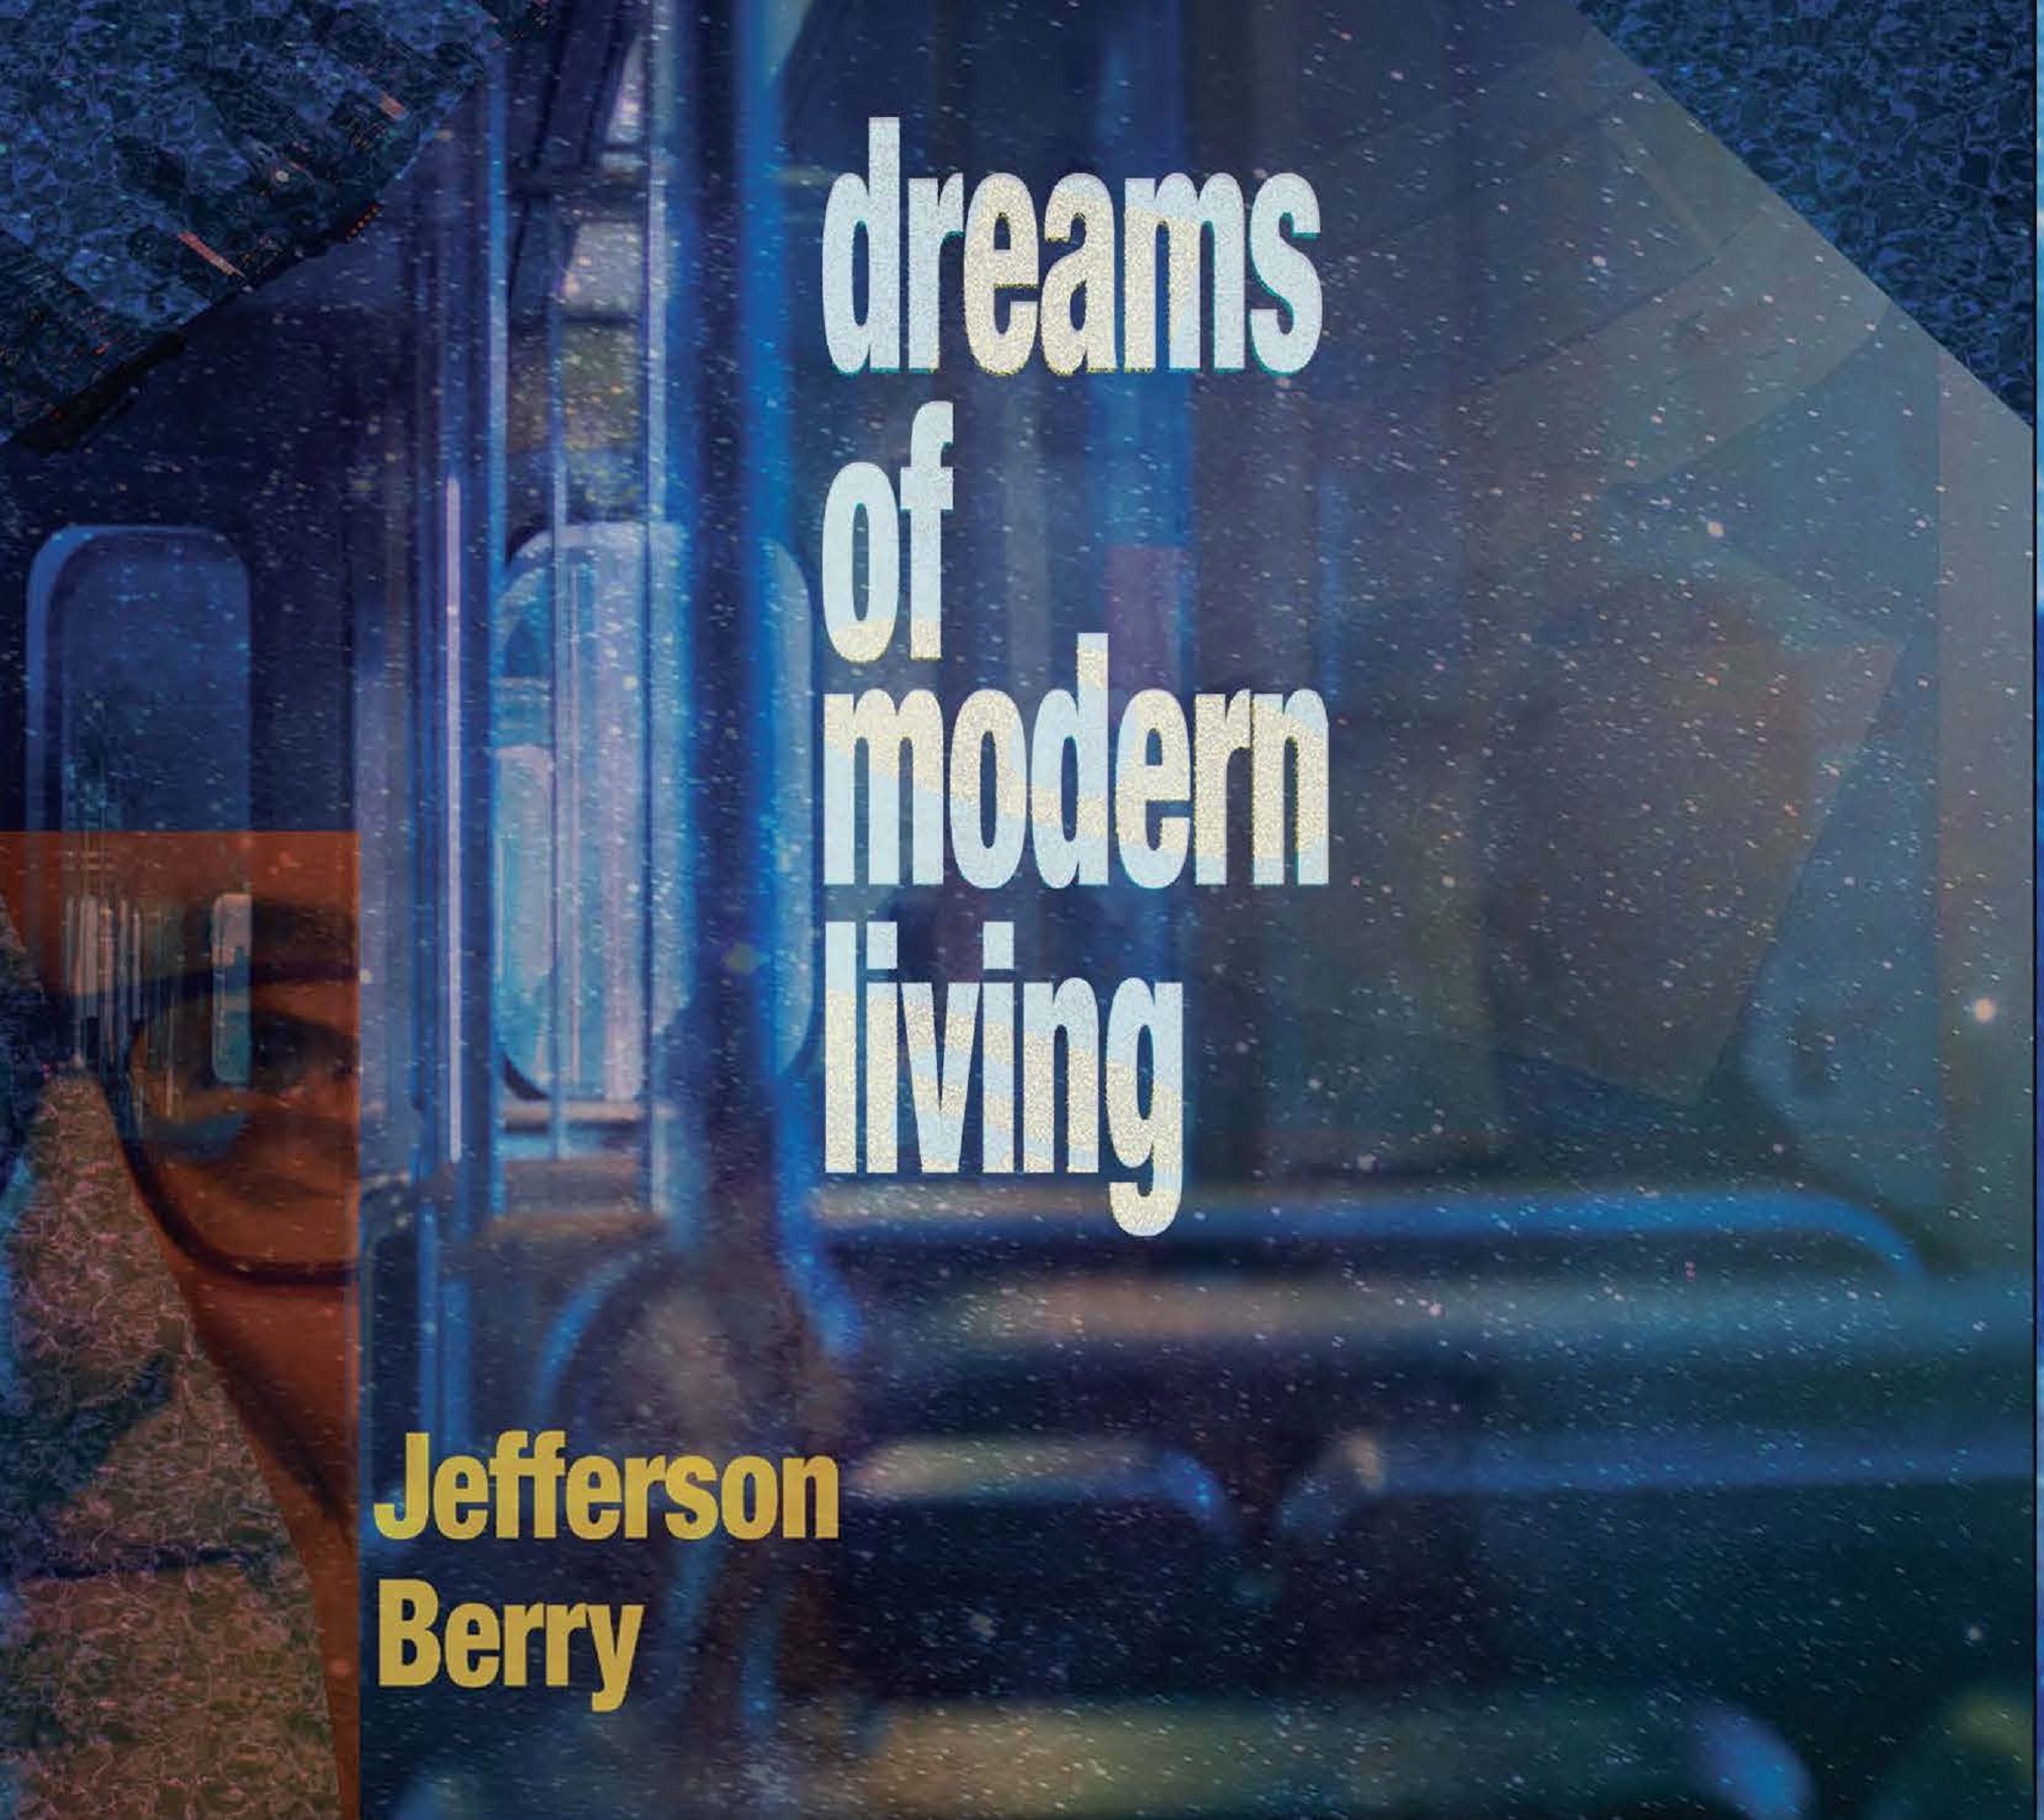 Jefferson Berry's Story Focused "Dreams of Modern Living" Due 1/27/23